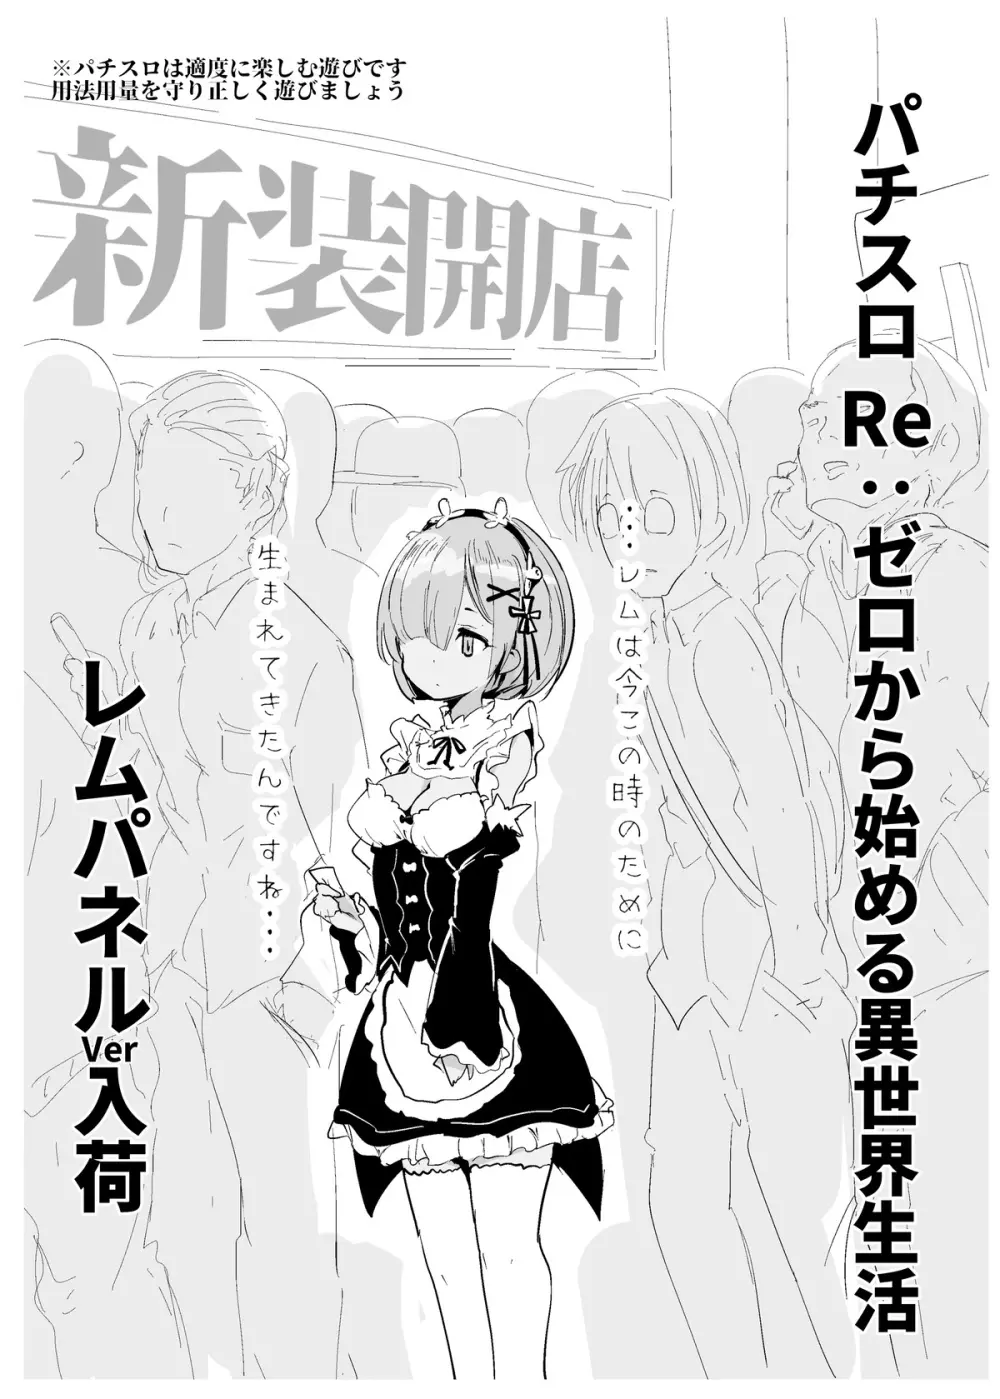 Re:ゼロから始めるパチスロ生活 Page.16